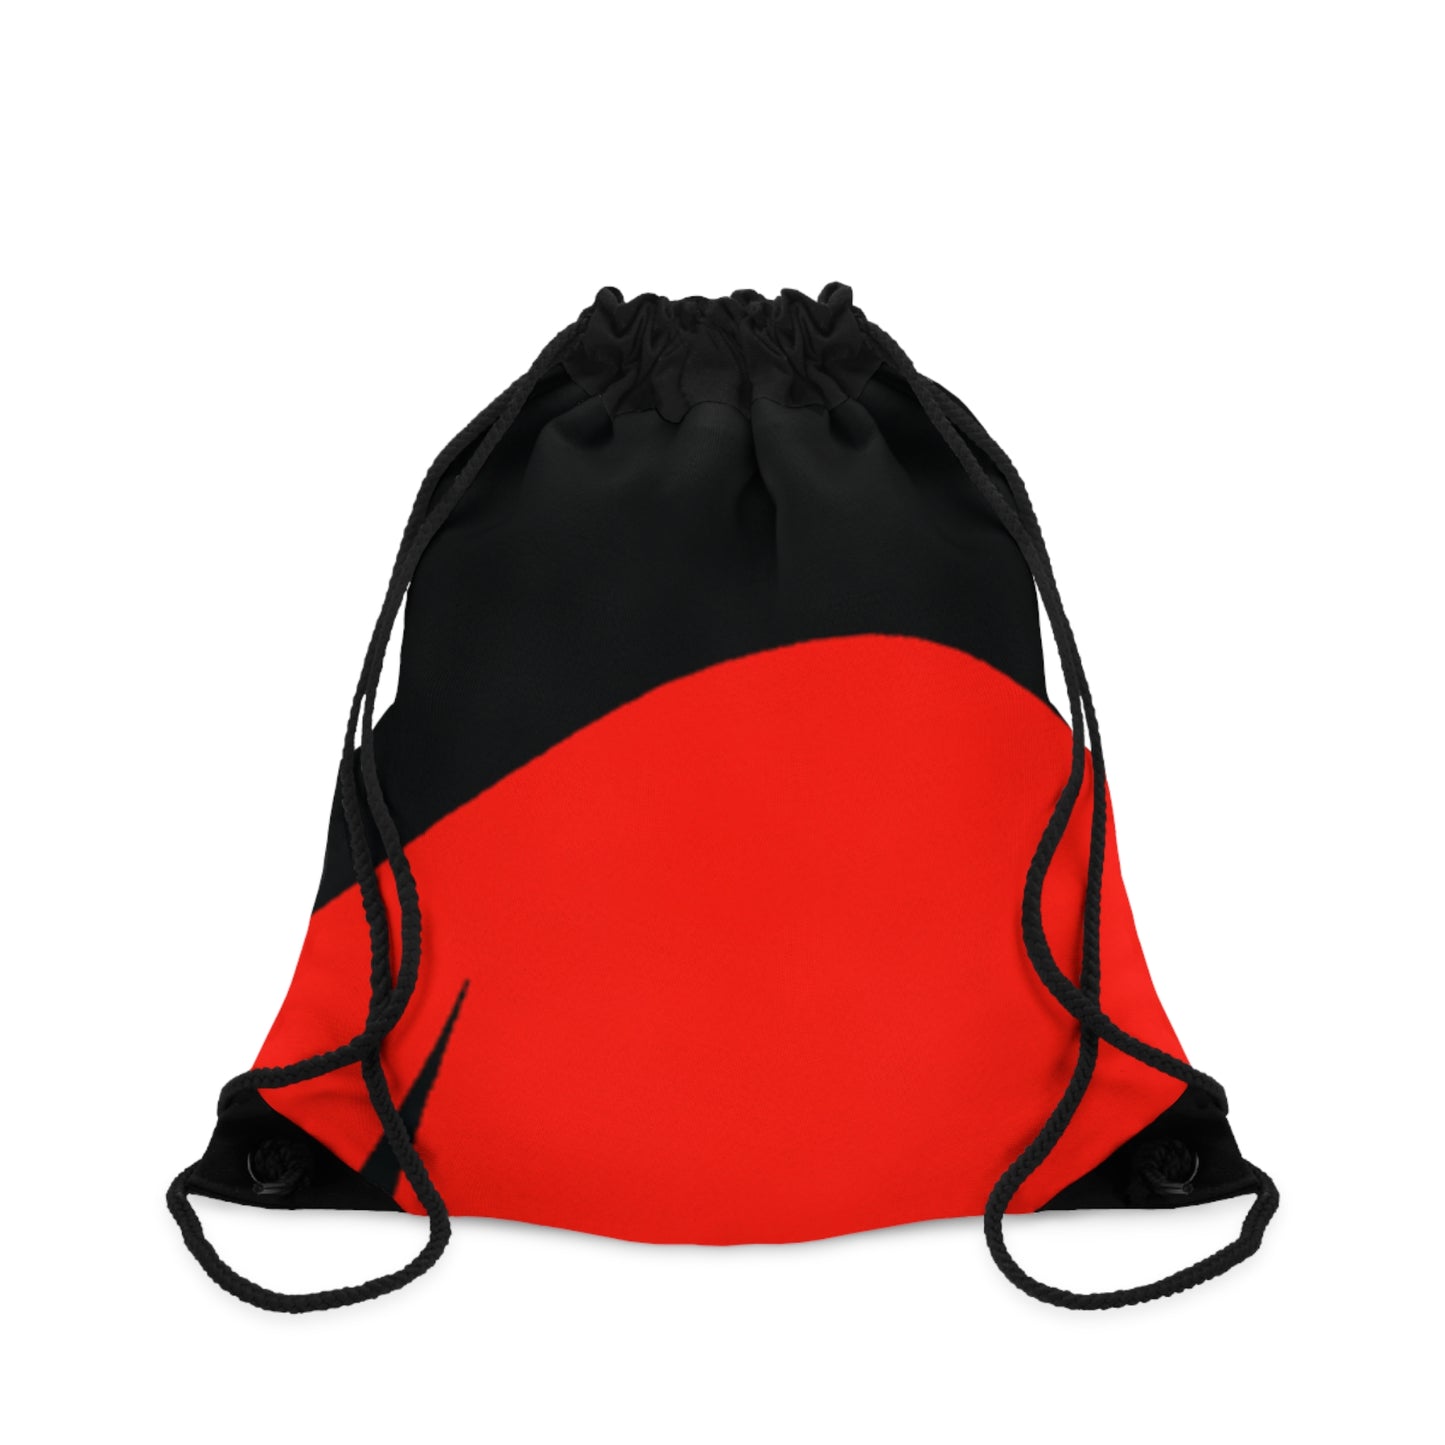 "Dynamic Grace: A Story of Physical Motion in Colorful Motion" - Go Plus Drawstring Bag